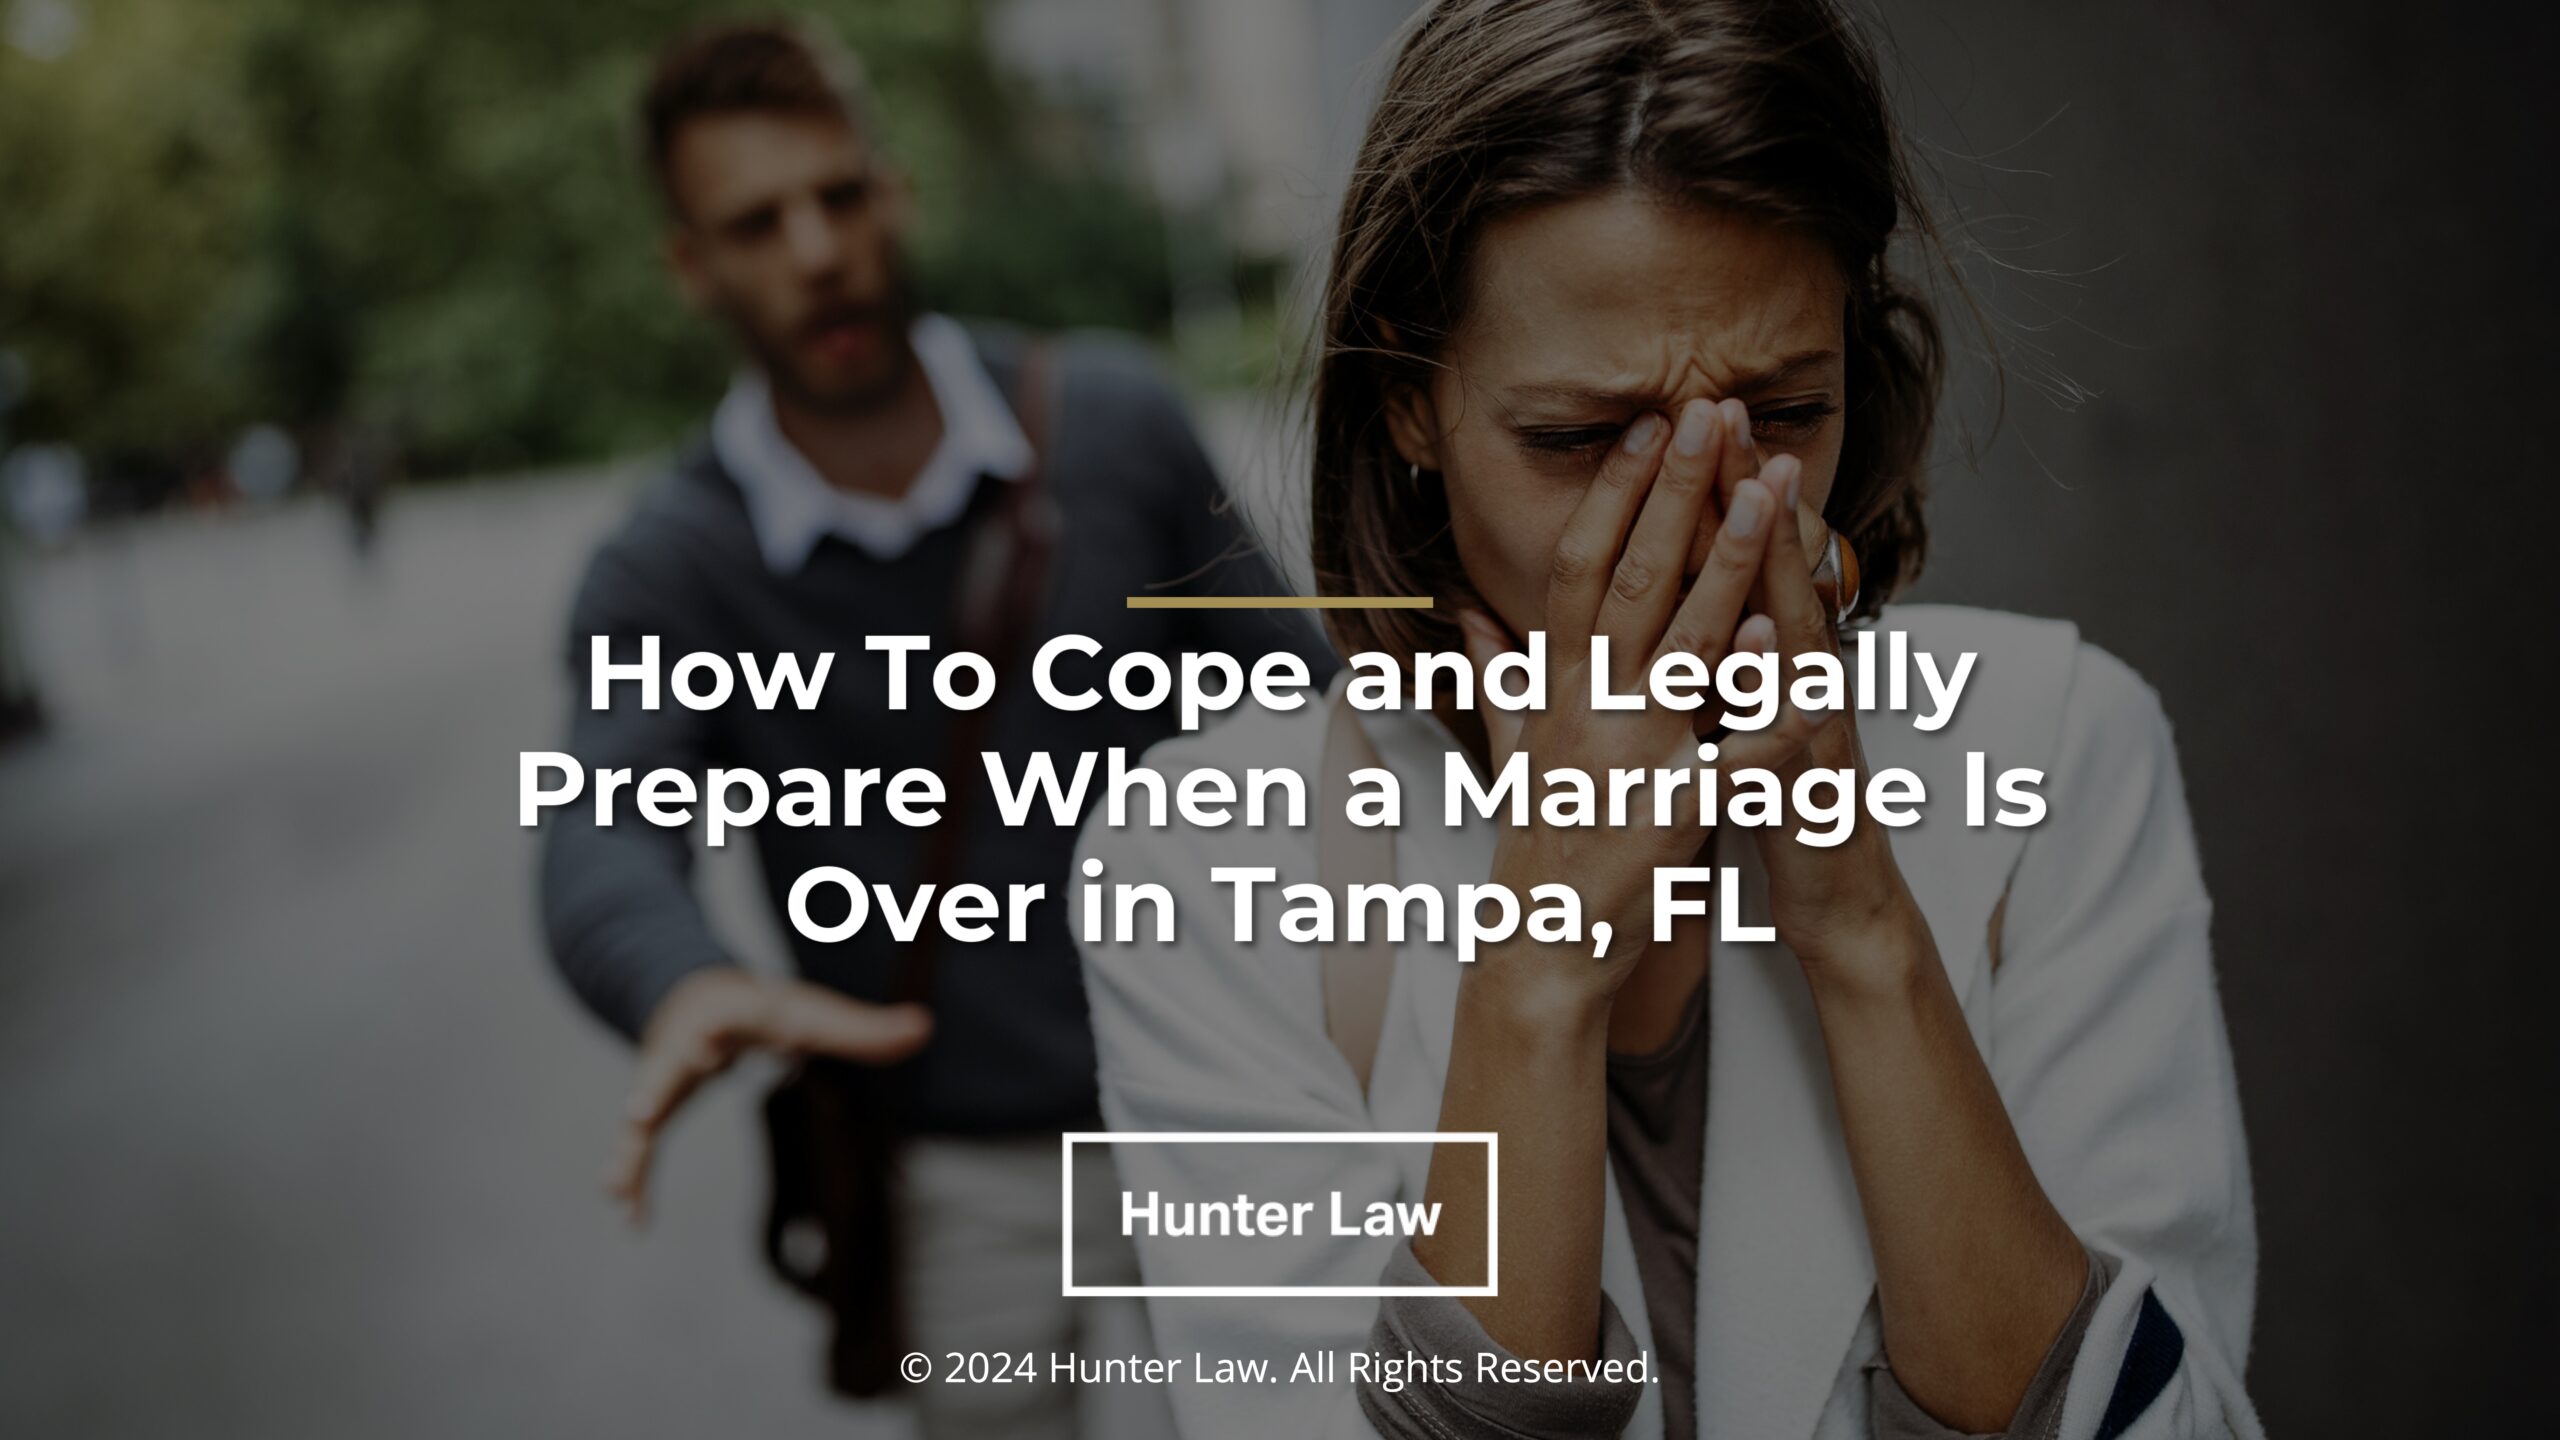 Hunter Law_Featured – How To Cope and Legally Prepare When a Marriage Is Over in Tampa, FL